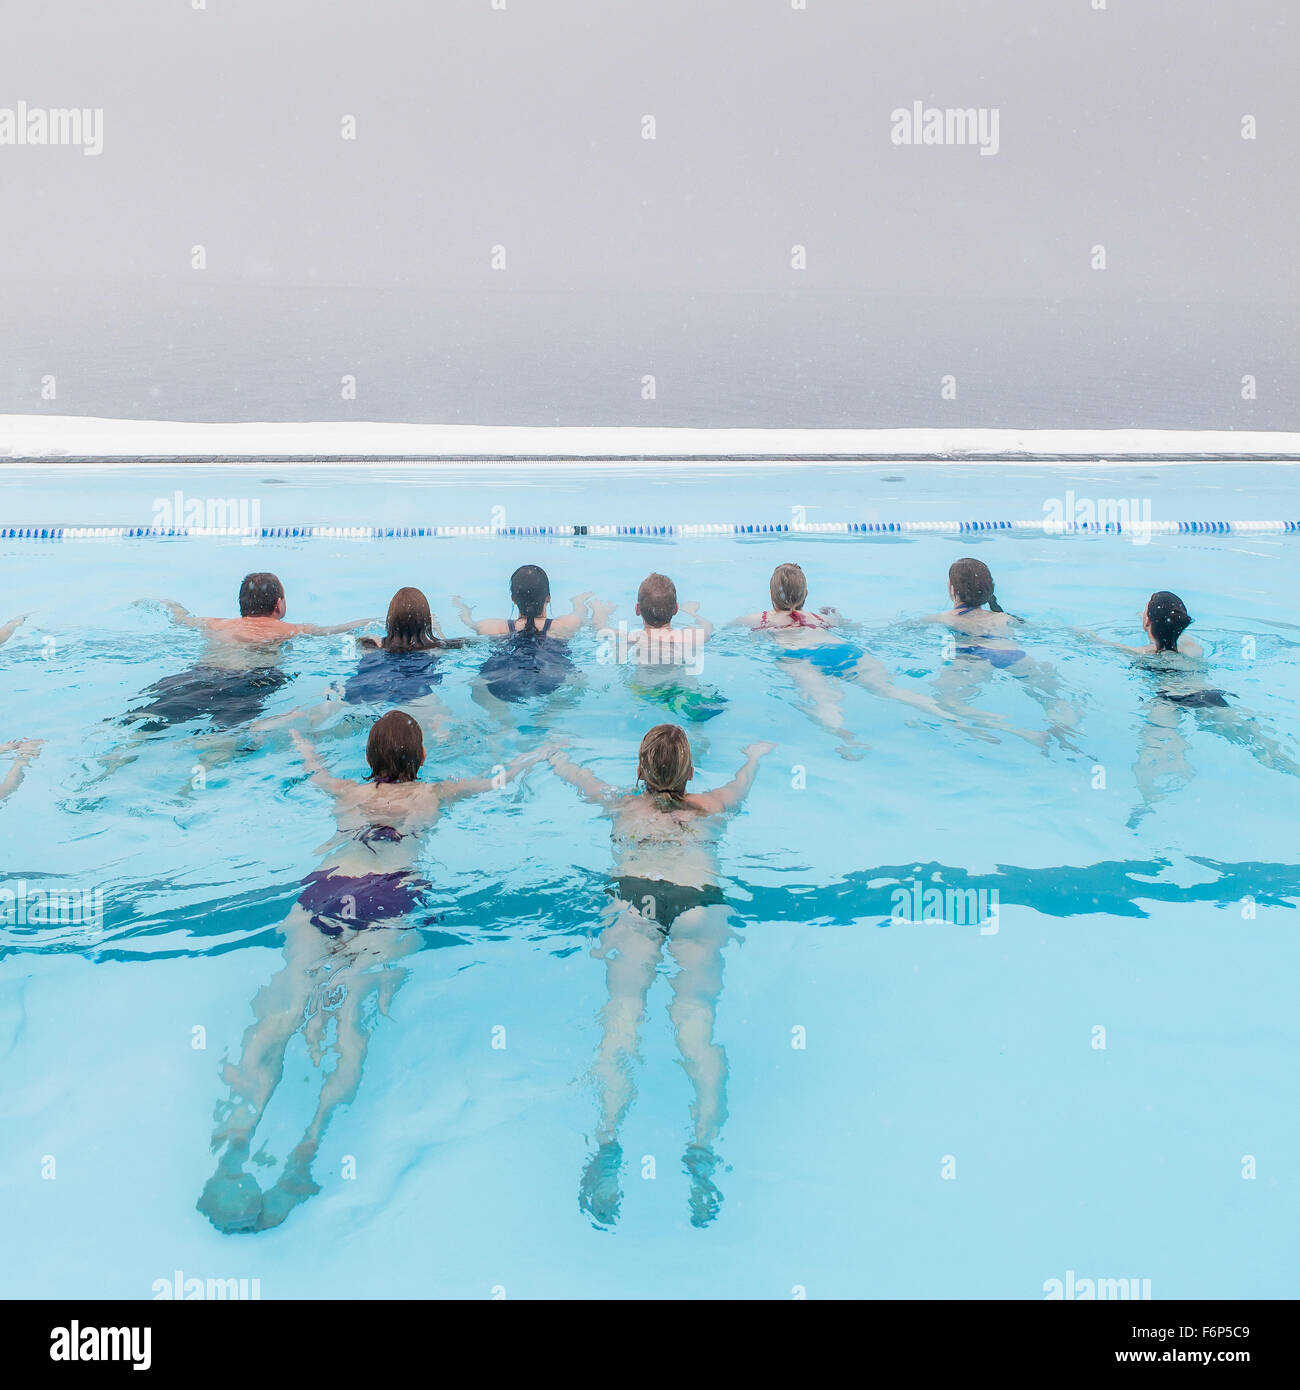 People swimming outside in the winter, geothermal heated pool, Hofsos, Iceland Stock Photo